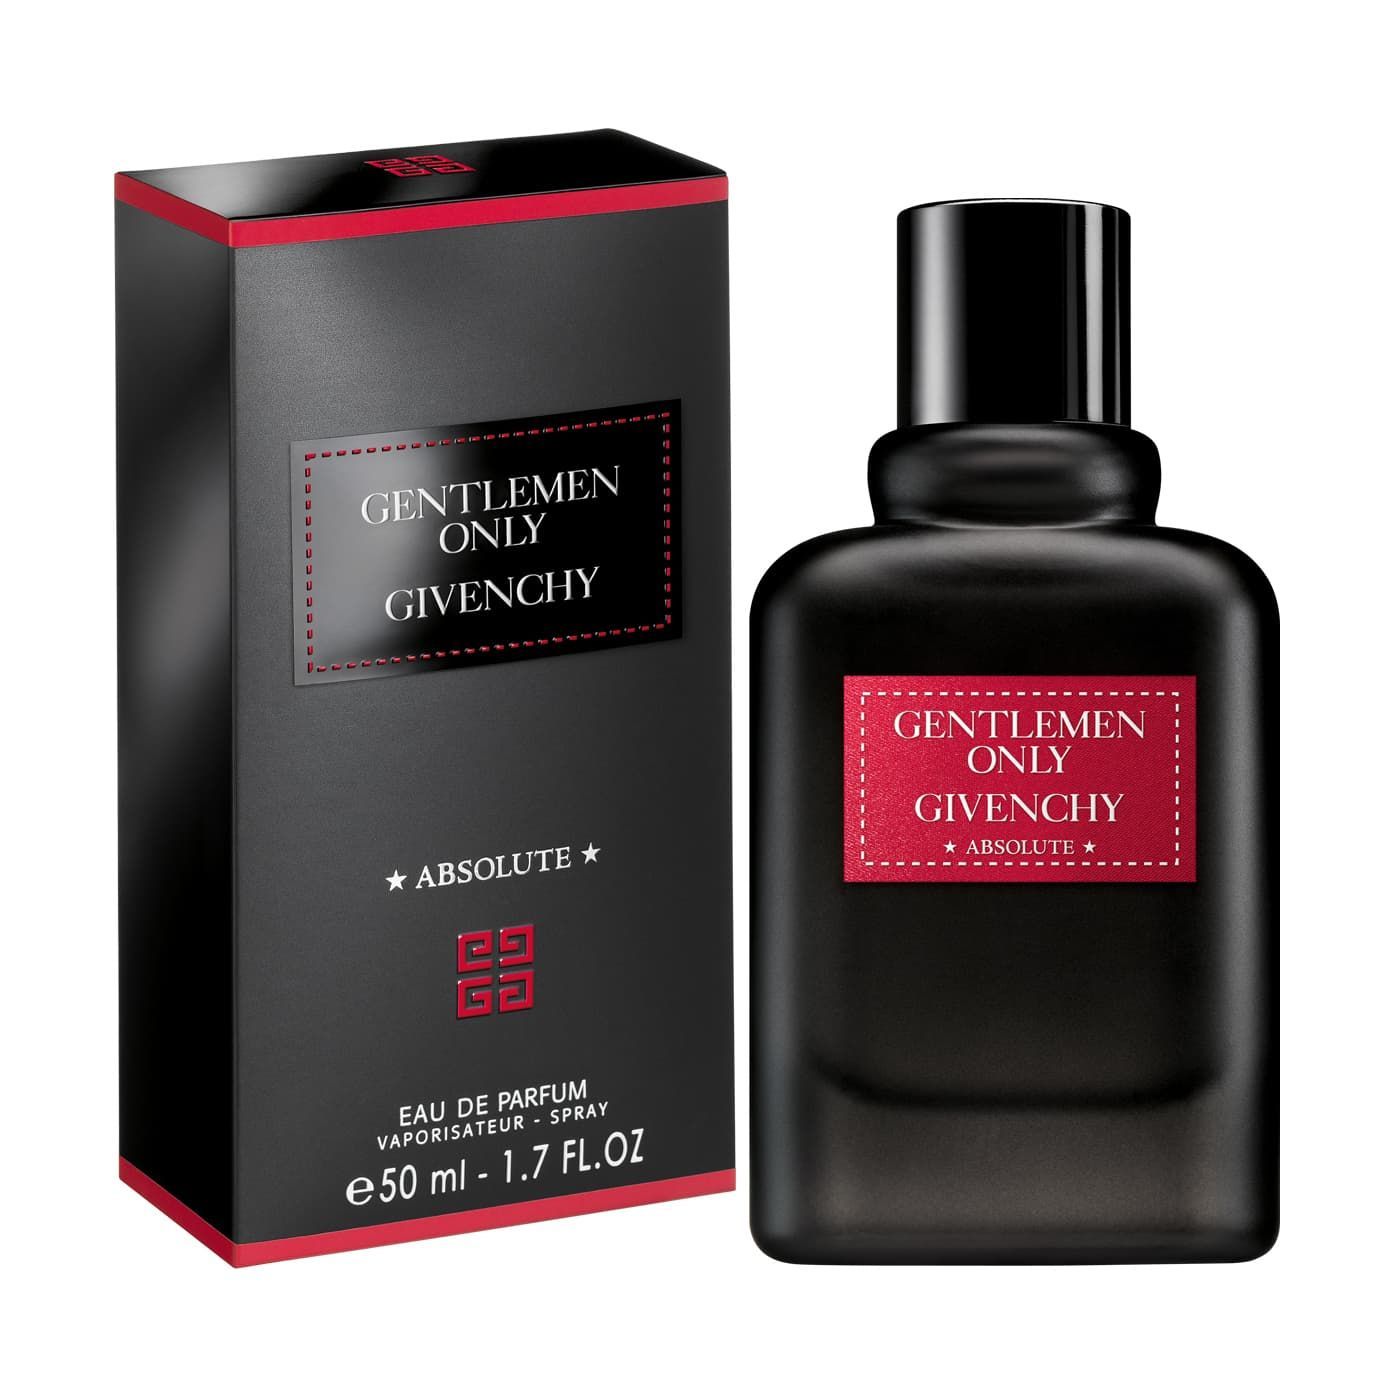 Only absolute. Givenchy Gentlemen only духи. Gentleman only духи мужские Givenchy. Туалетная вода Givenchy Gentlemen only absolute. Givenchy Gentleman absolute.